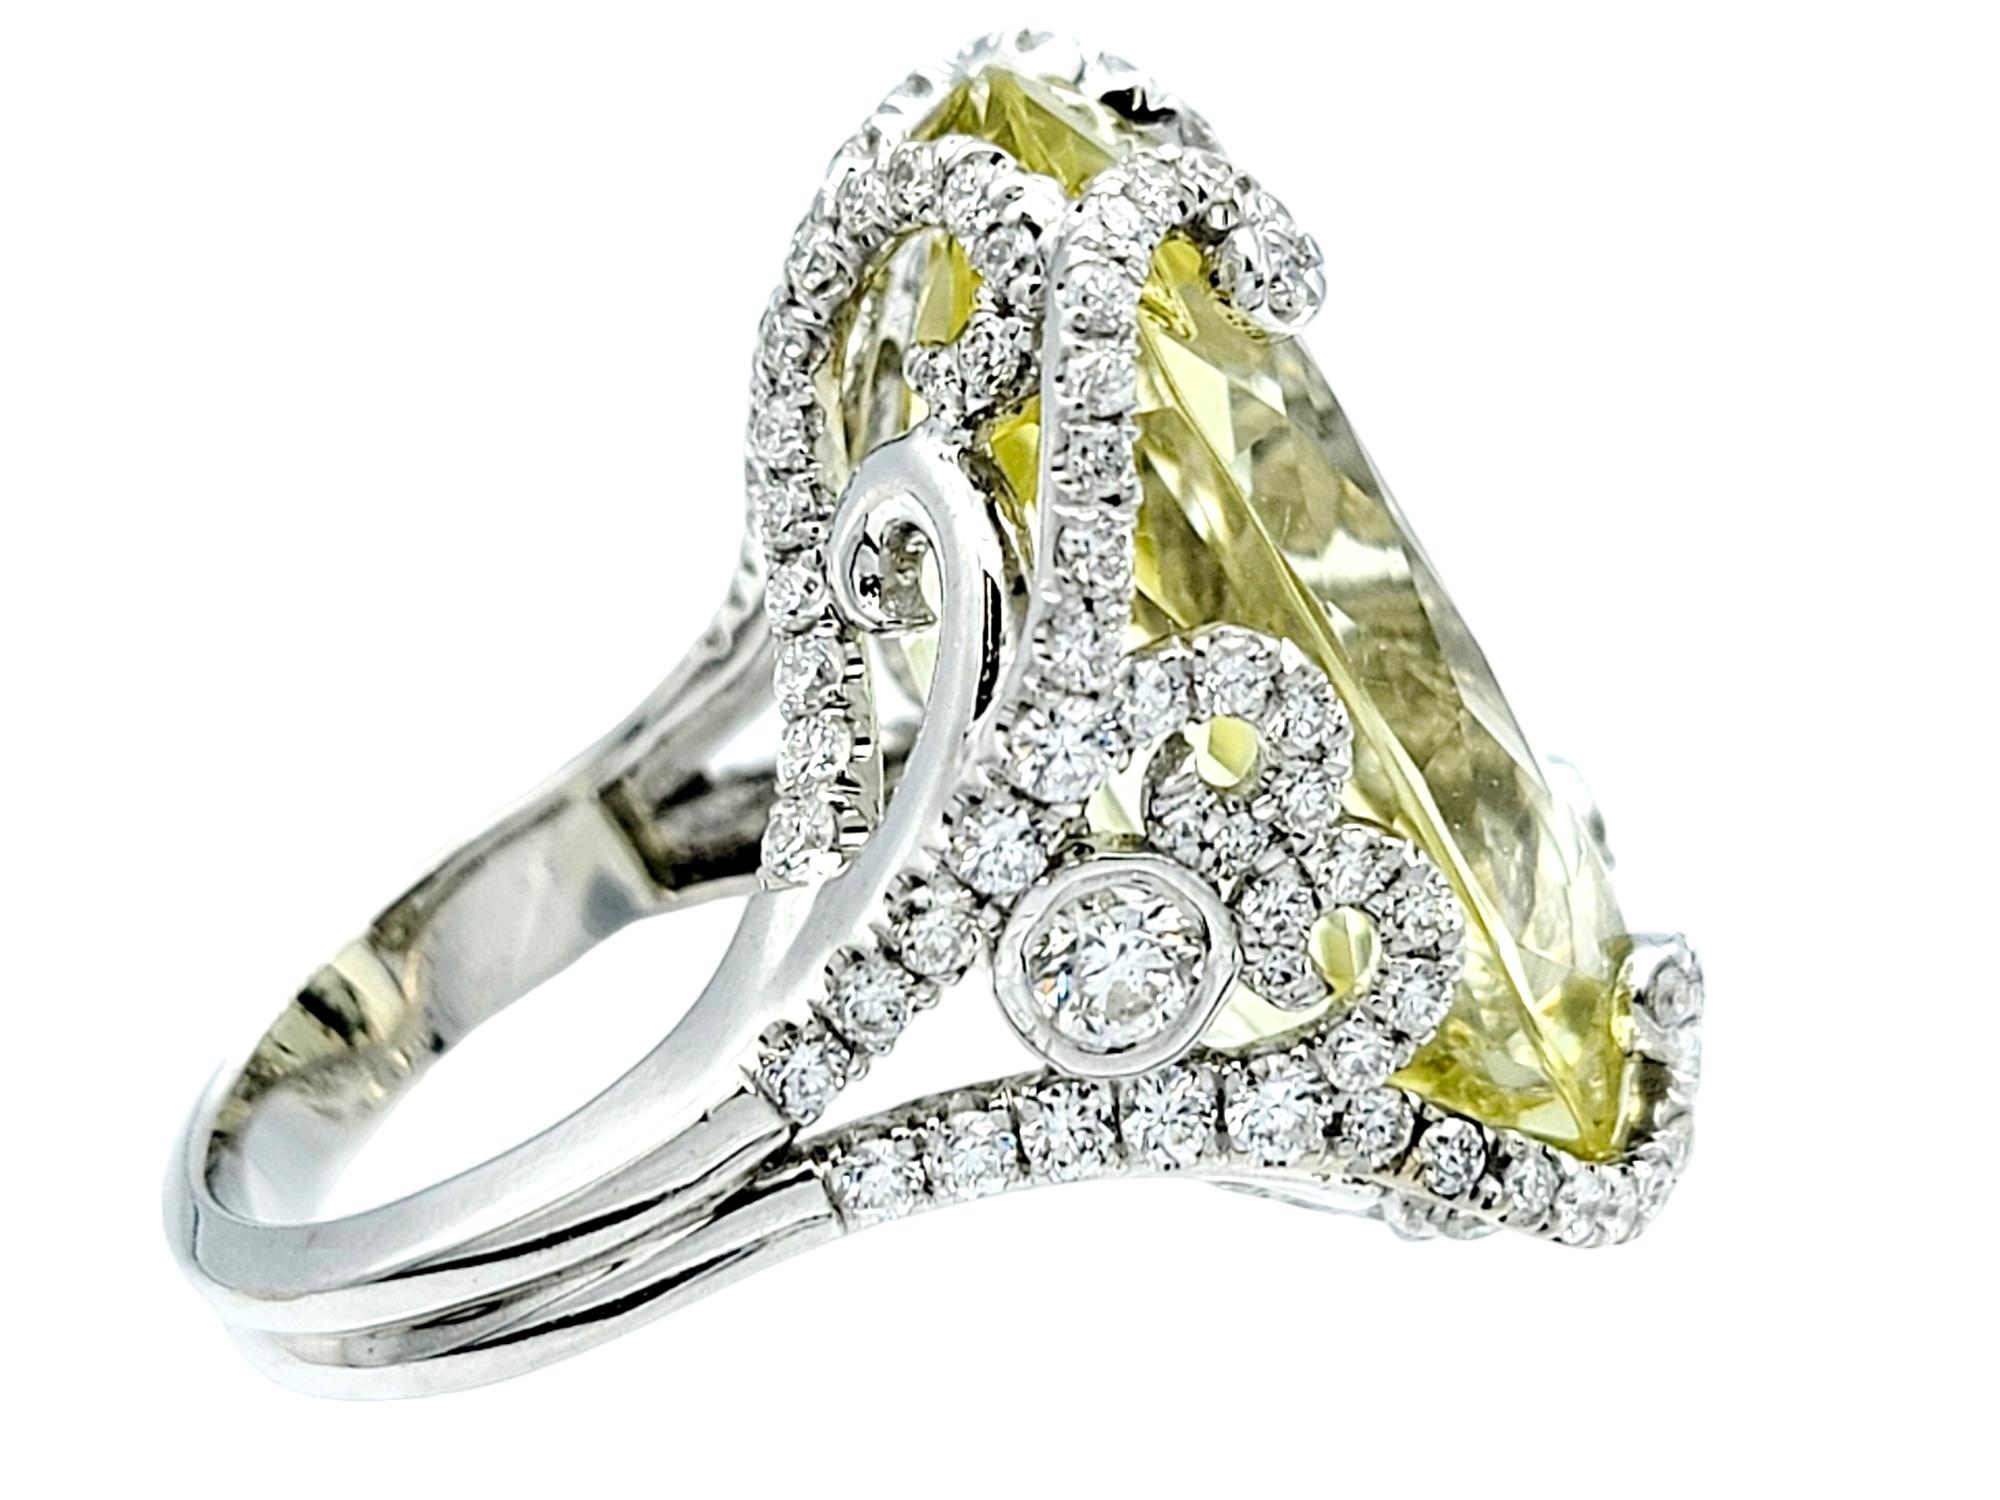 Ring size: 6.5

This bold and scintillating cocktail ring features a swirling diamond design surrounding a sensational 31.0 carat prasiolite gemstone. With its dreamy color and sensational sparkle, this sophisticated showstopper is sure to turn